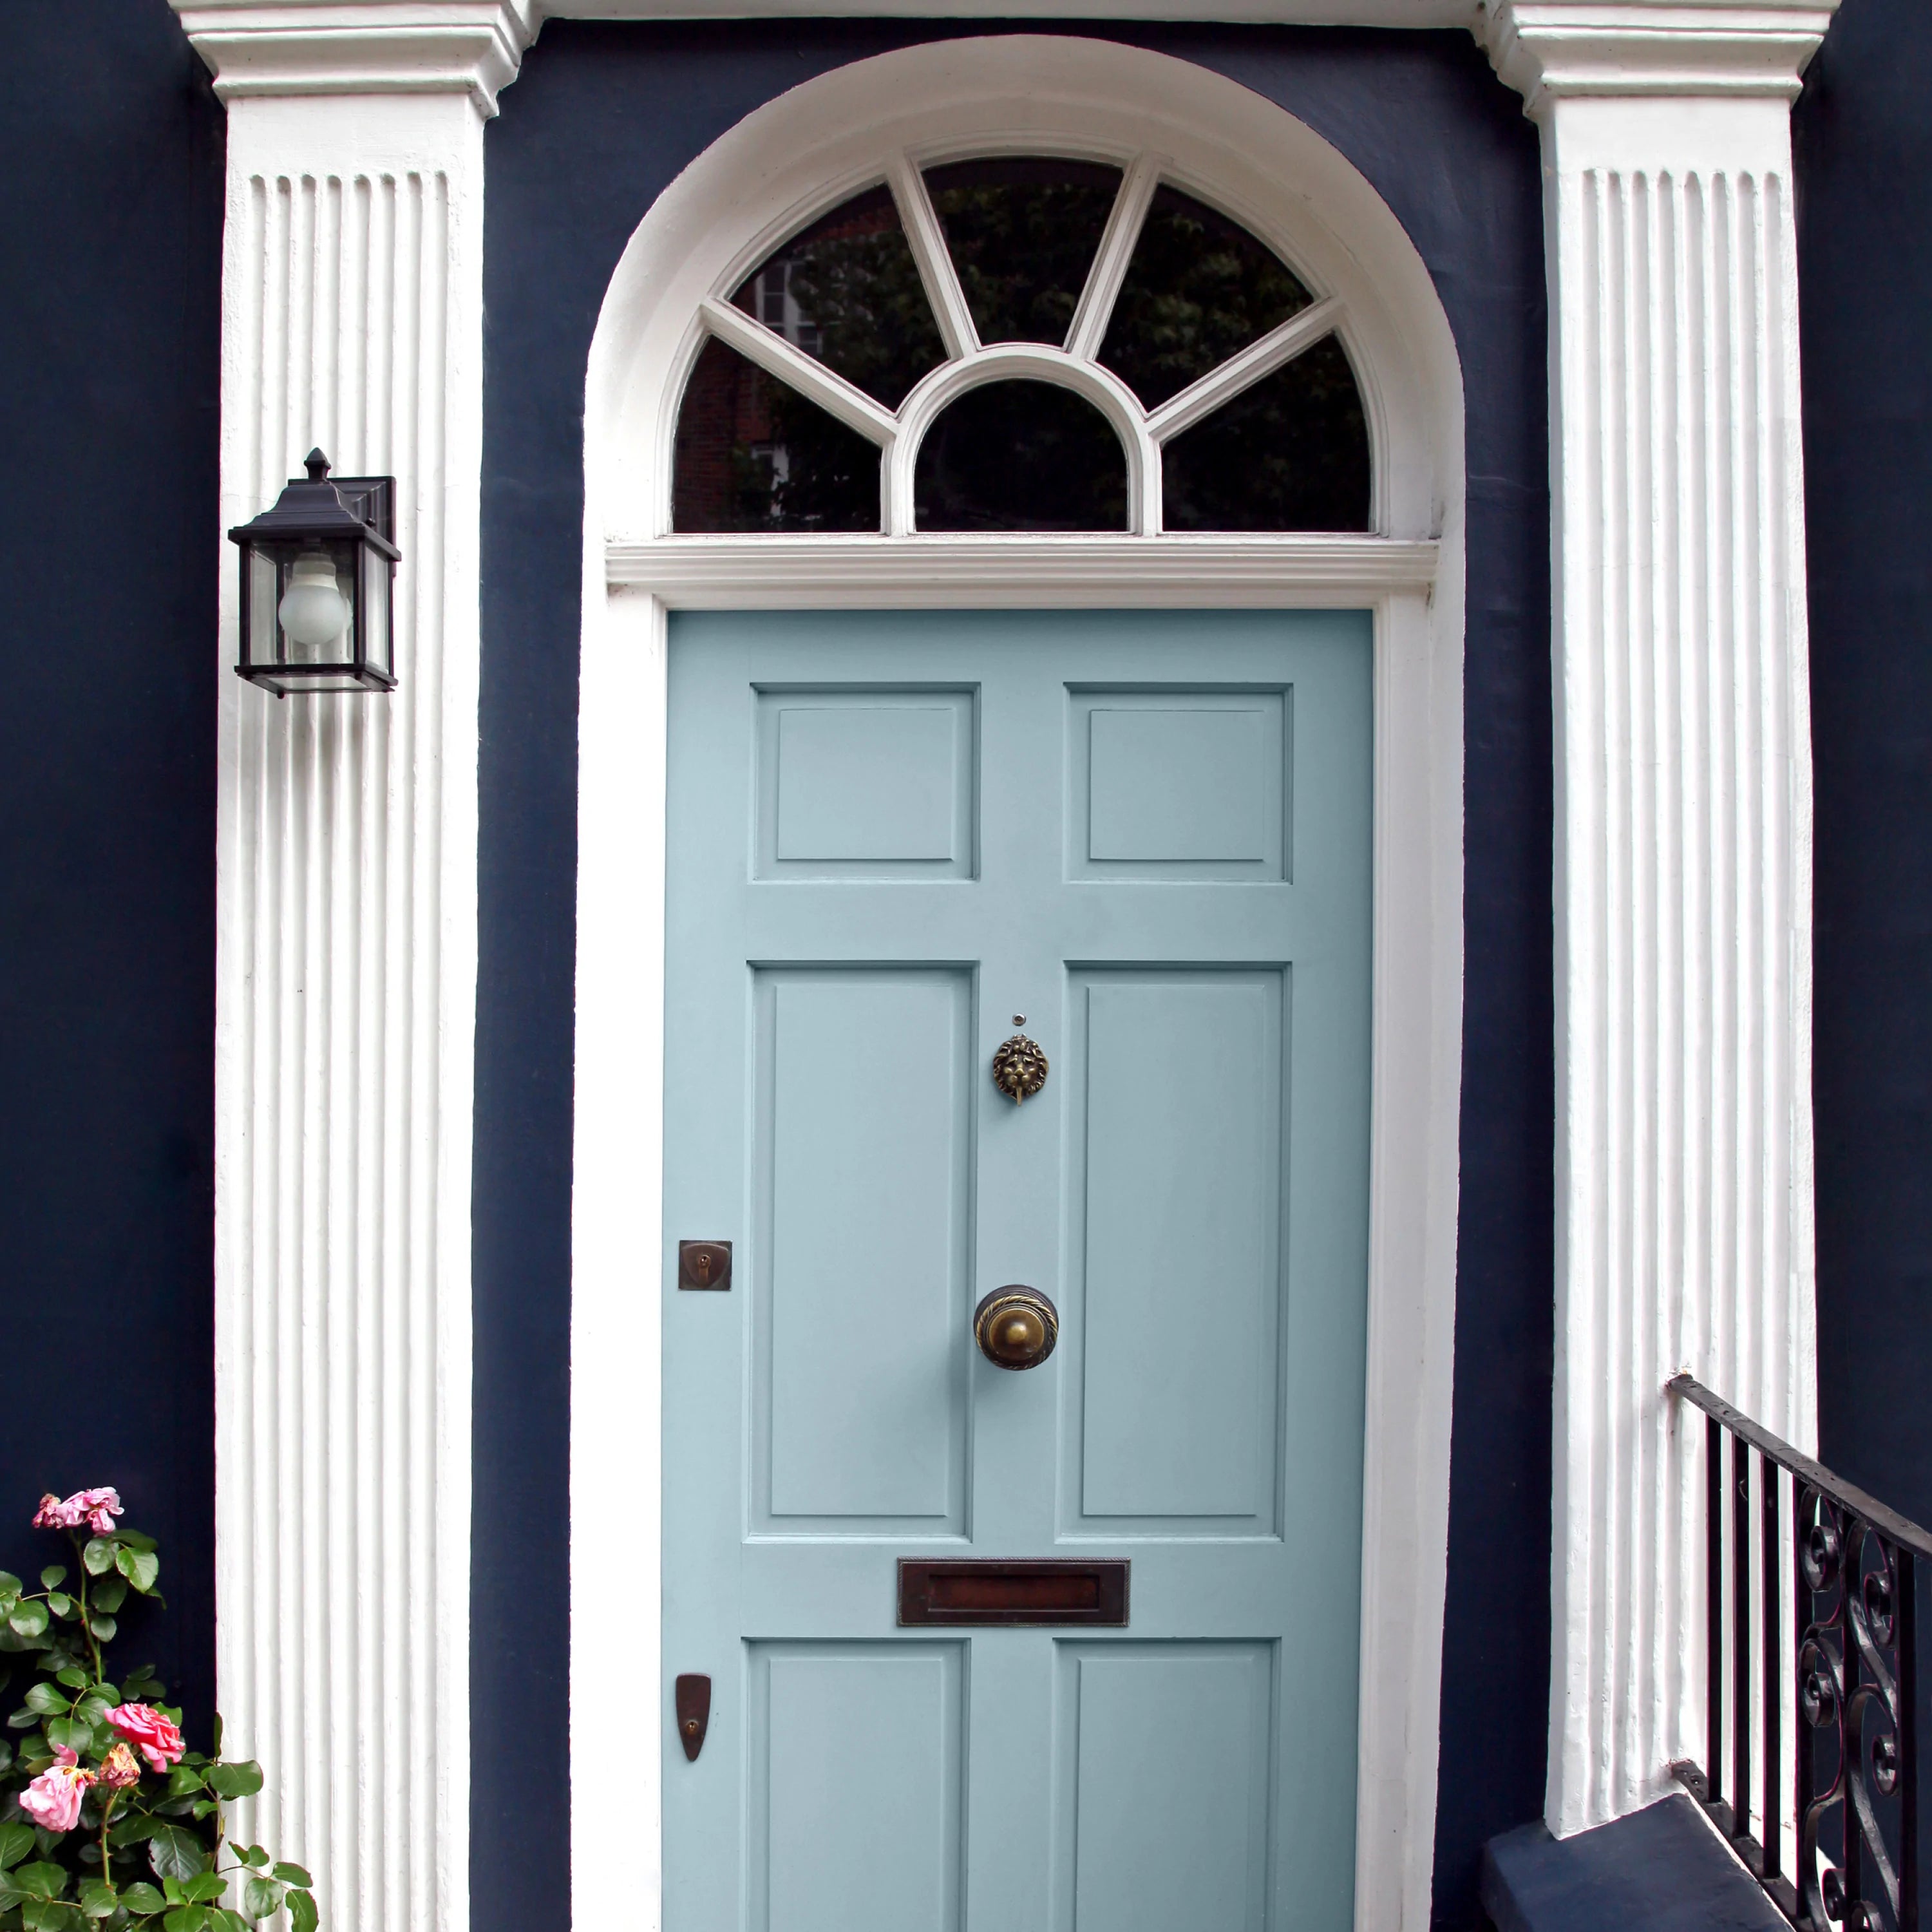 Colourtrend Grey Door | Same Day Dublin Delivery by Weirs of Baggot St